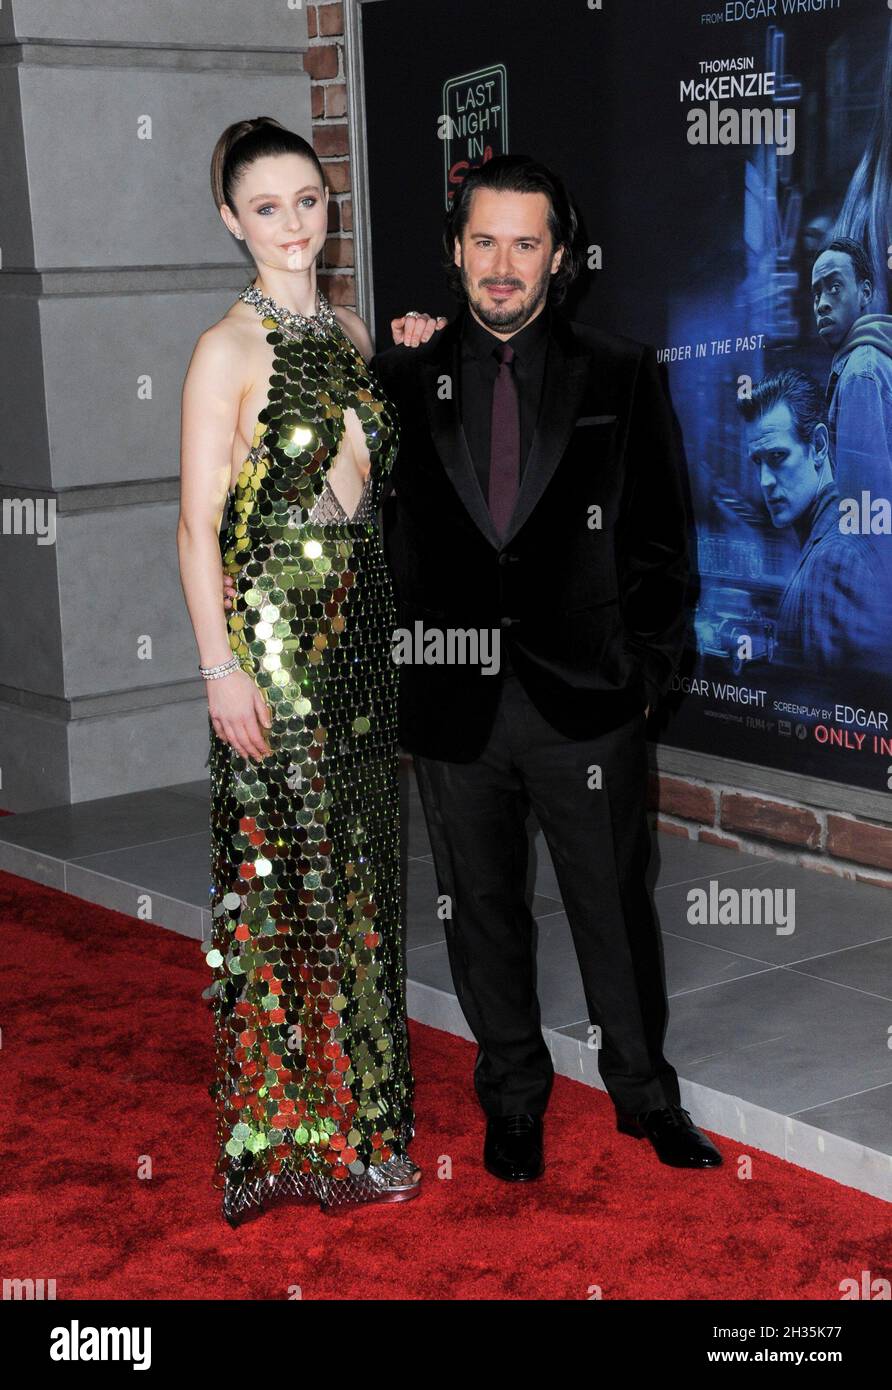 Los Angeles, CA. 25th Oct, 2021. Thomasin McKenzie, Edgar Wright at arrivals for LAST NIGHT IN SOHO Premiere, Academy Museum of Motion Pictures, Los Angeles, CA October 25, 2021. Credit: Elizabeth Goodenough/Everett Collection/Alamy Live News Stock Photo